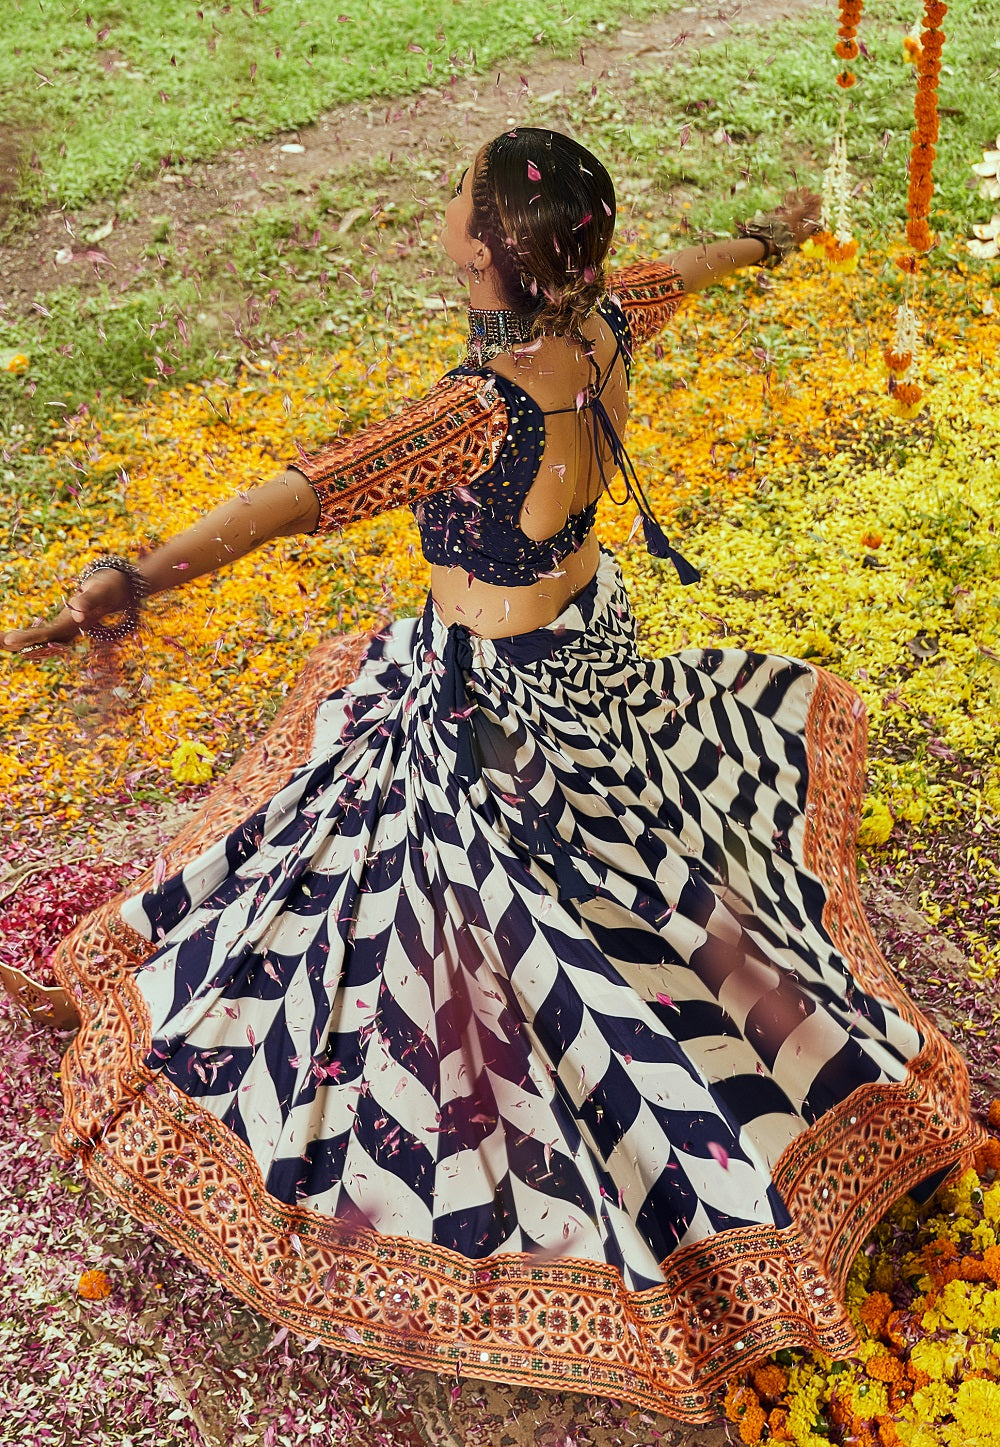 Muslin Cotton Digital Printed Lehenga in Navy Blue and Off White